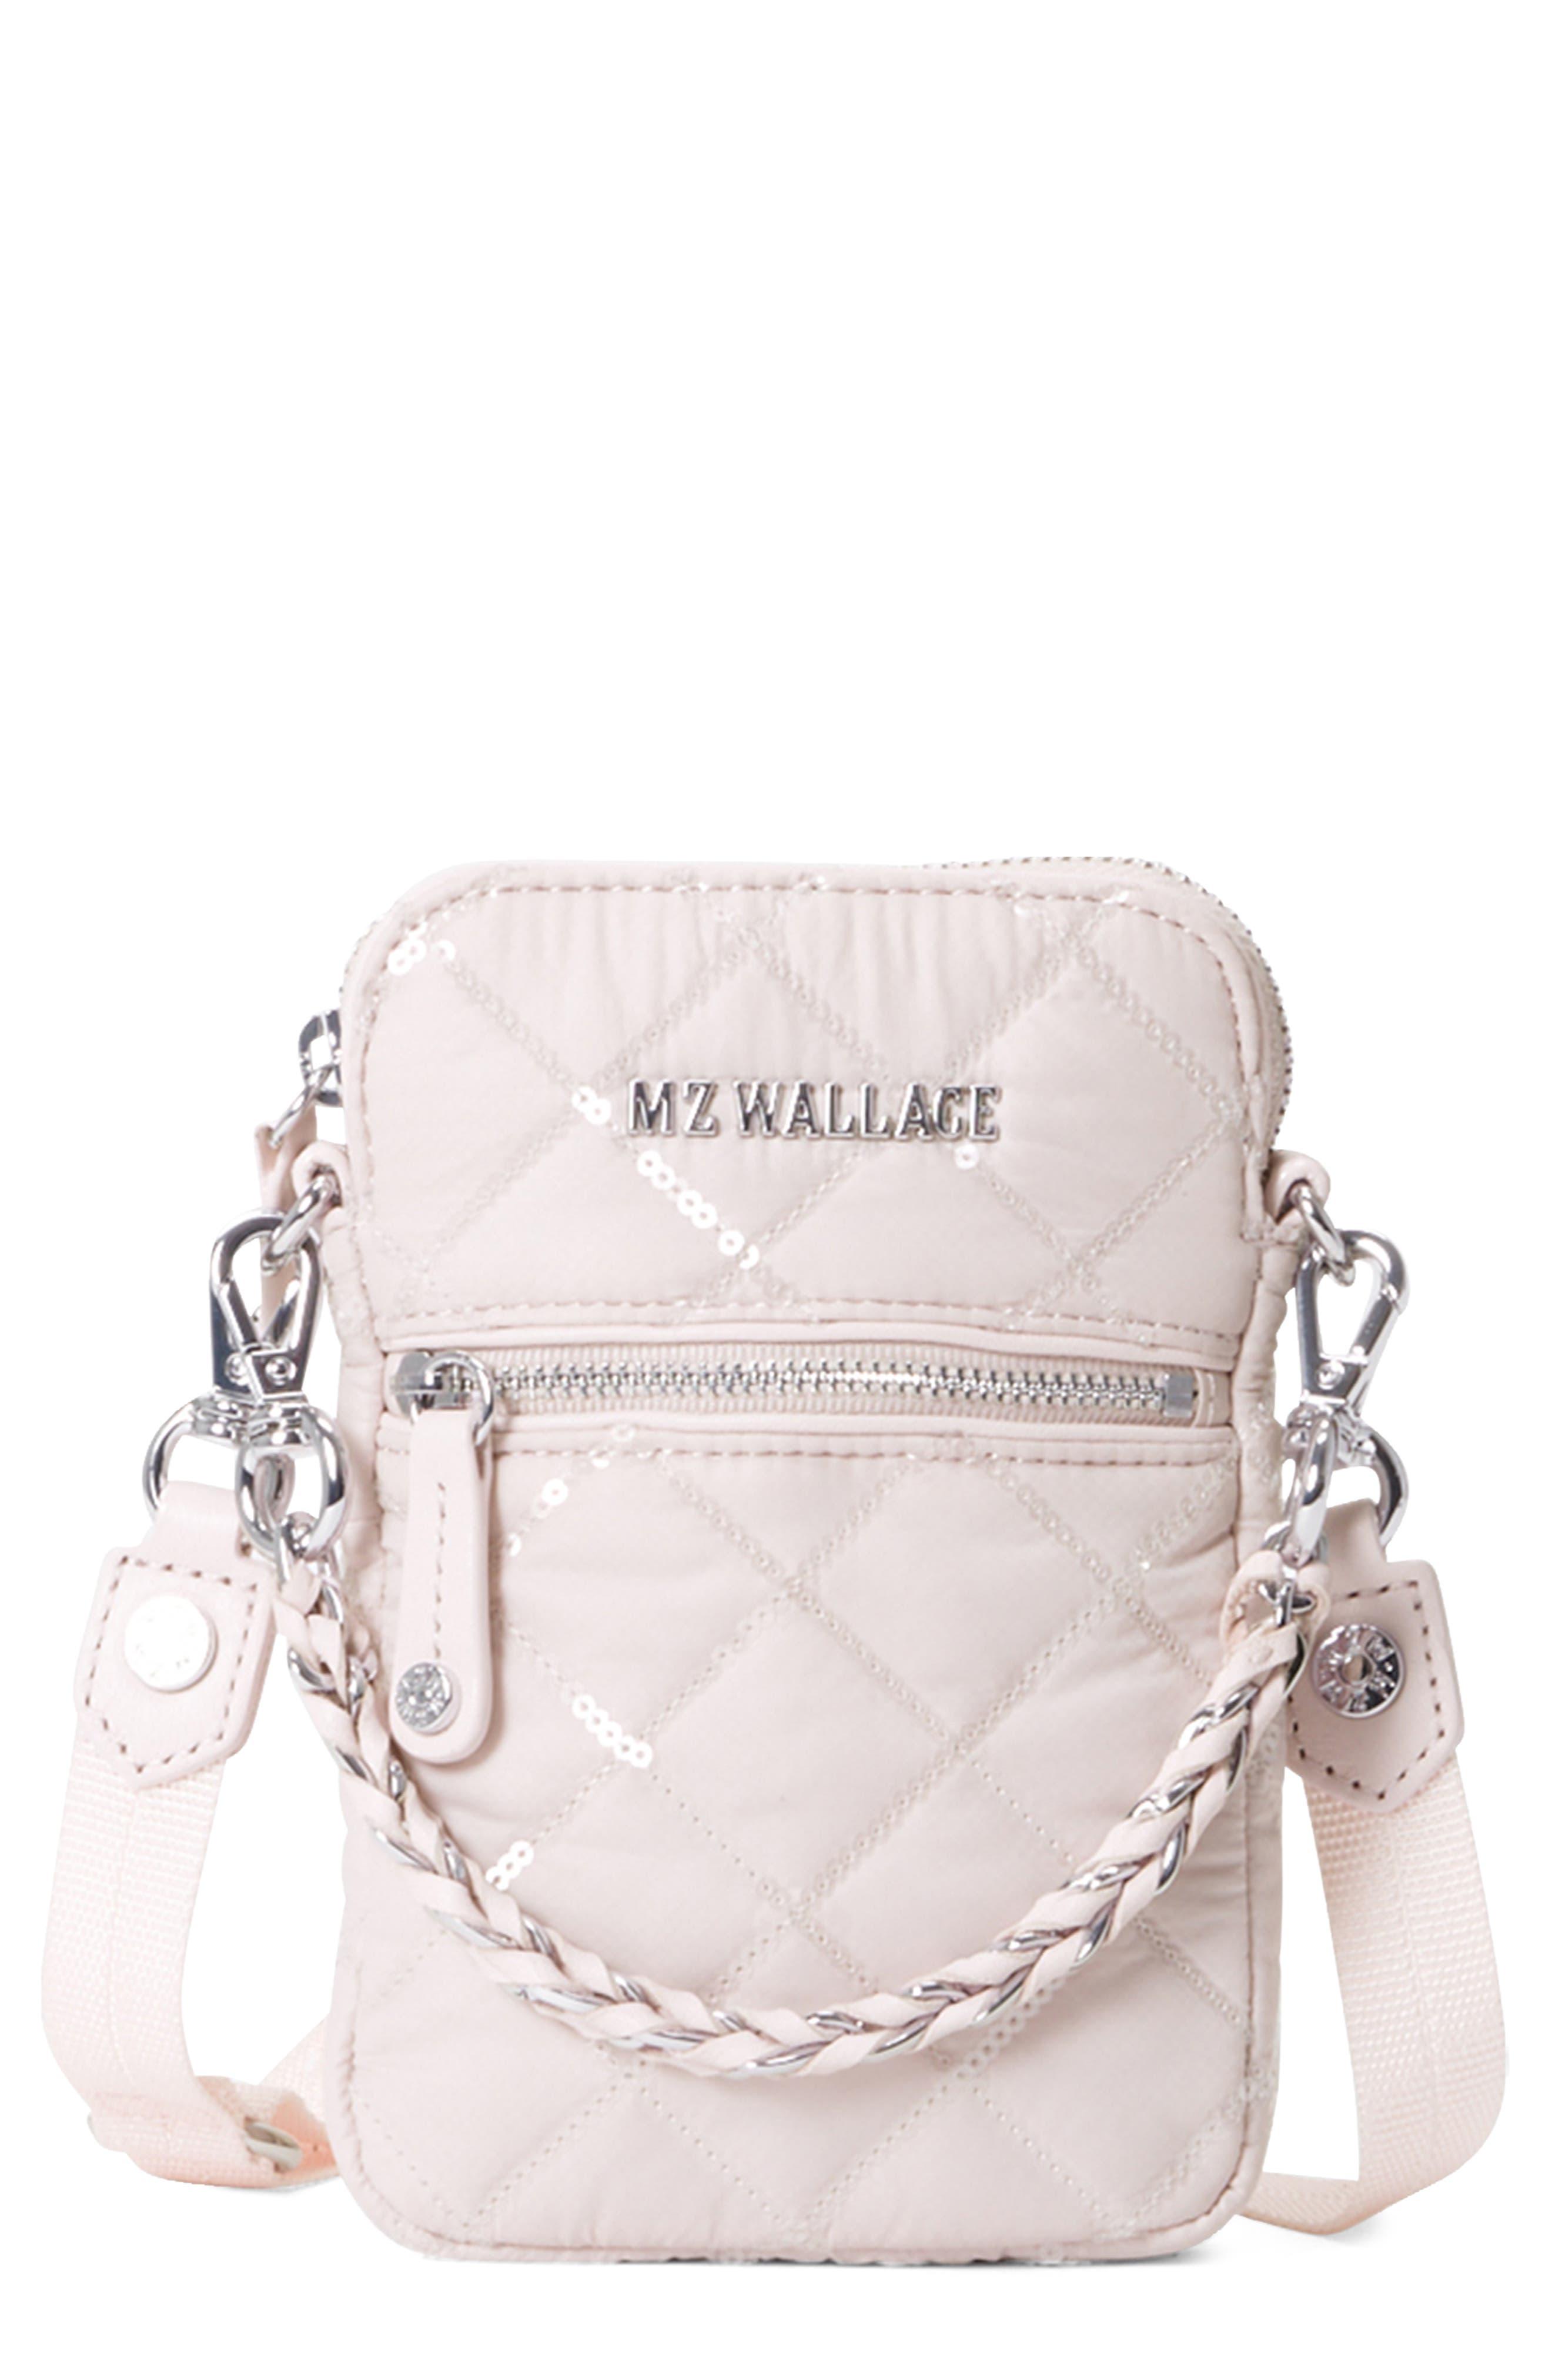 MZ Wallace Micro Crosby Crossbody Bag in Natural | Lyst